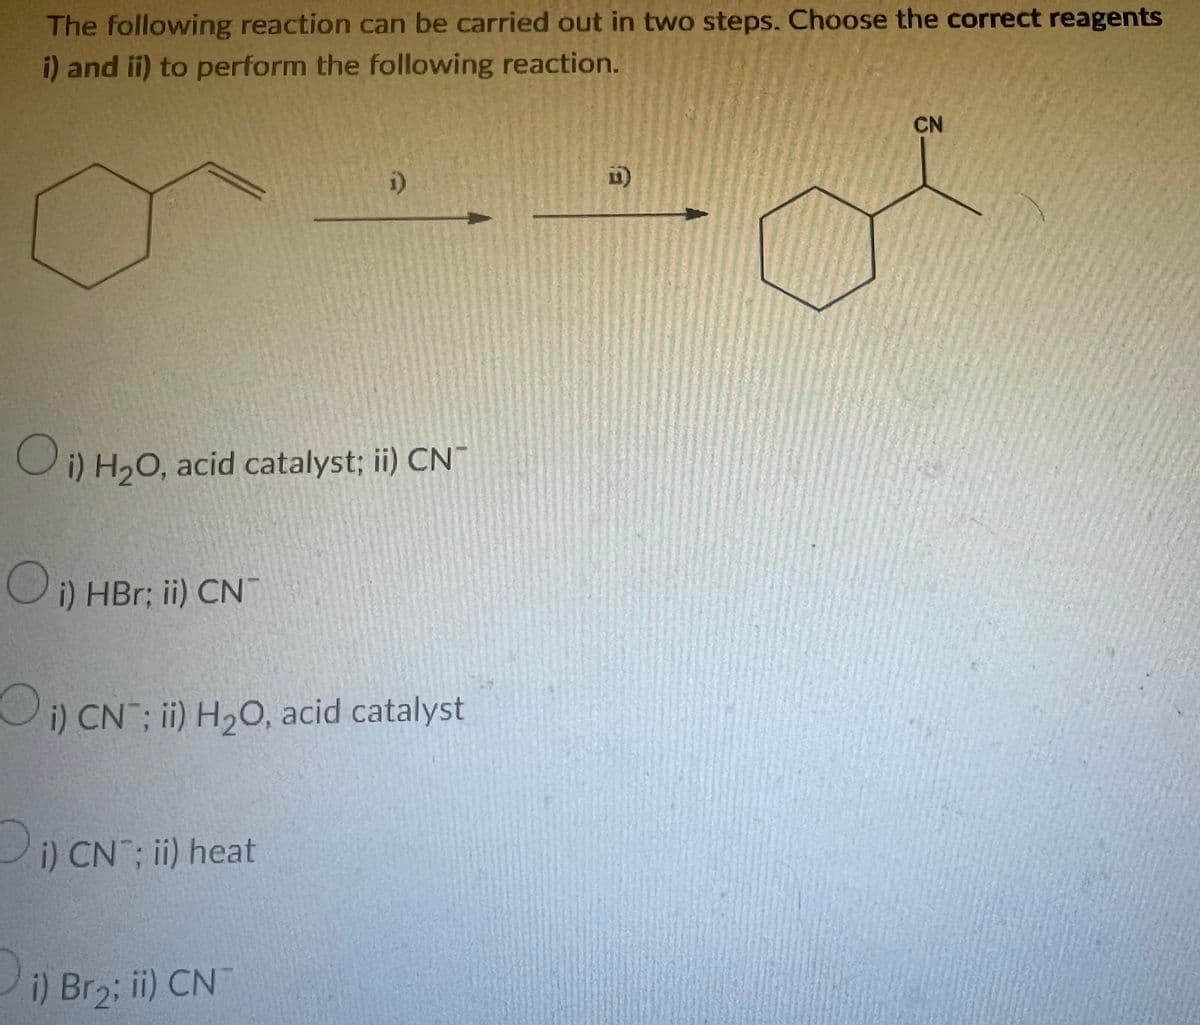 The following reaction can be carried out in two steps. Choose the correct reagents
i) and ii) to perform the following reaction.
CN
Oi) H₂O, acid catalyst; ii) CN
Oi) HBr; ii) CNT
Oi) CN; ii) H₂O, acid catalyst
i) CN; ii) heat
i) Br₂; ii) CN
.